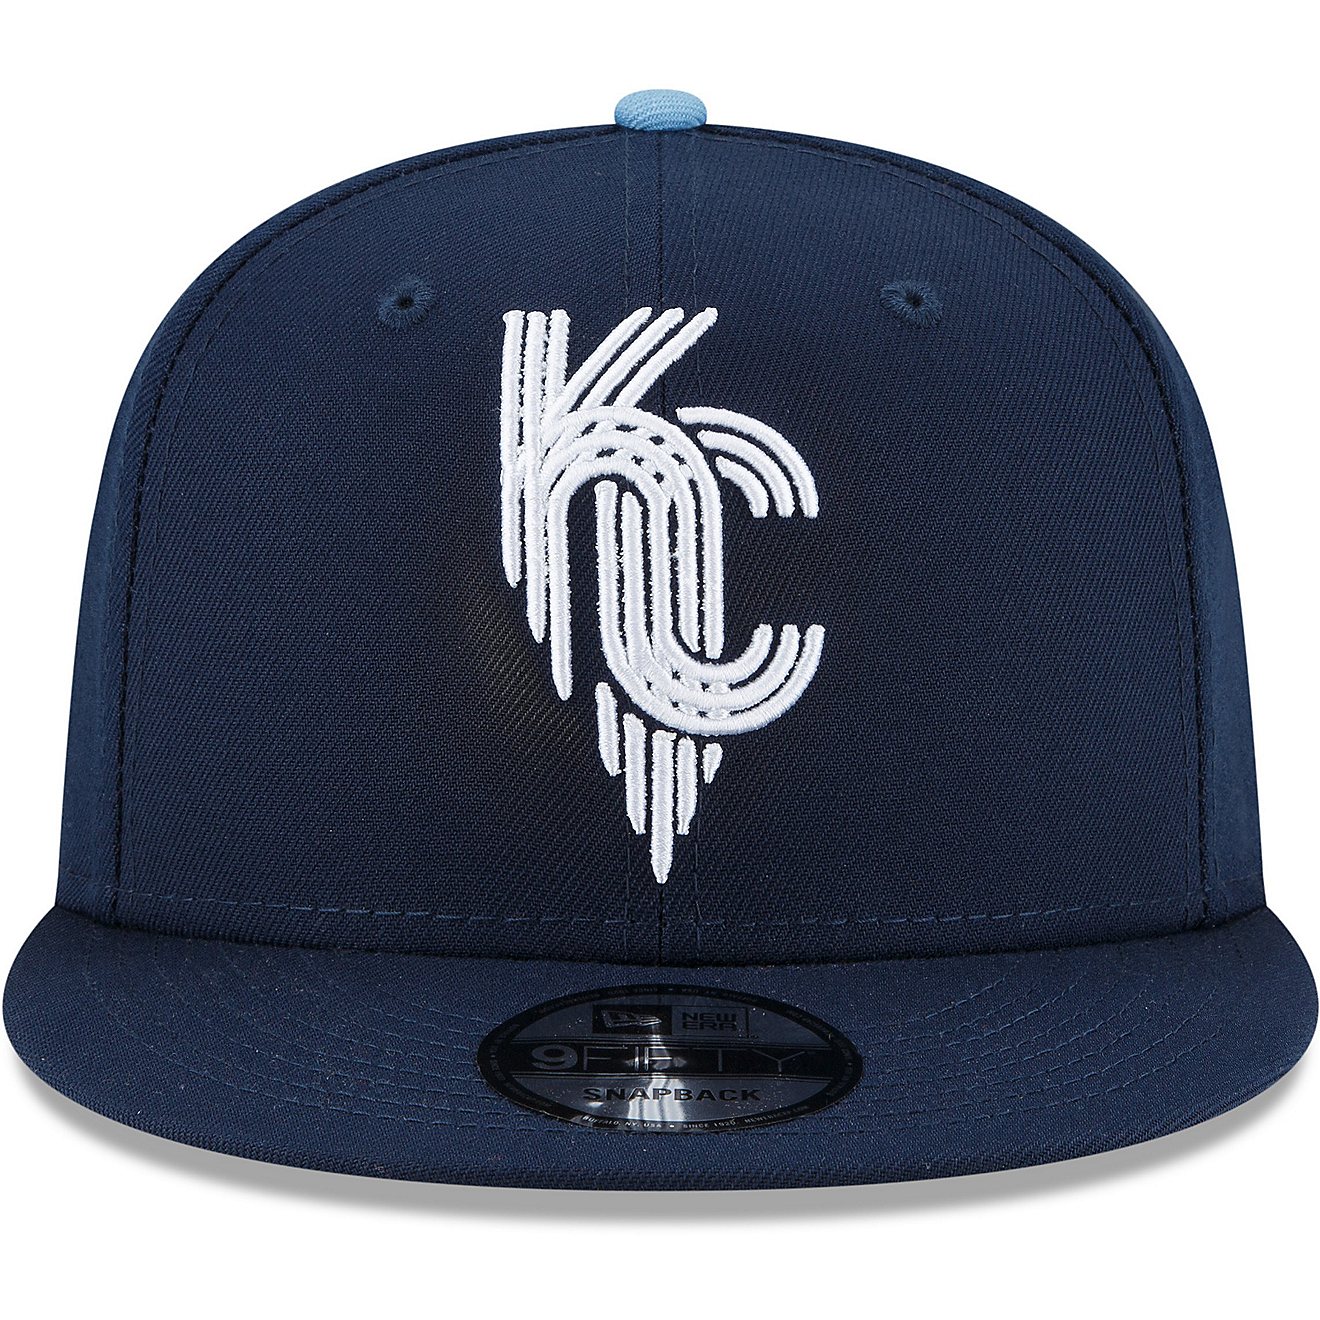 New Era Youth Kansas City Royals City Connect 9FIFTY Cap                                                                         - view number 9